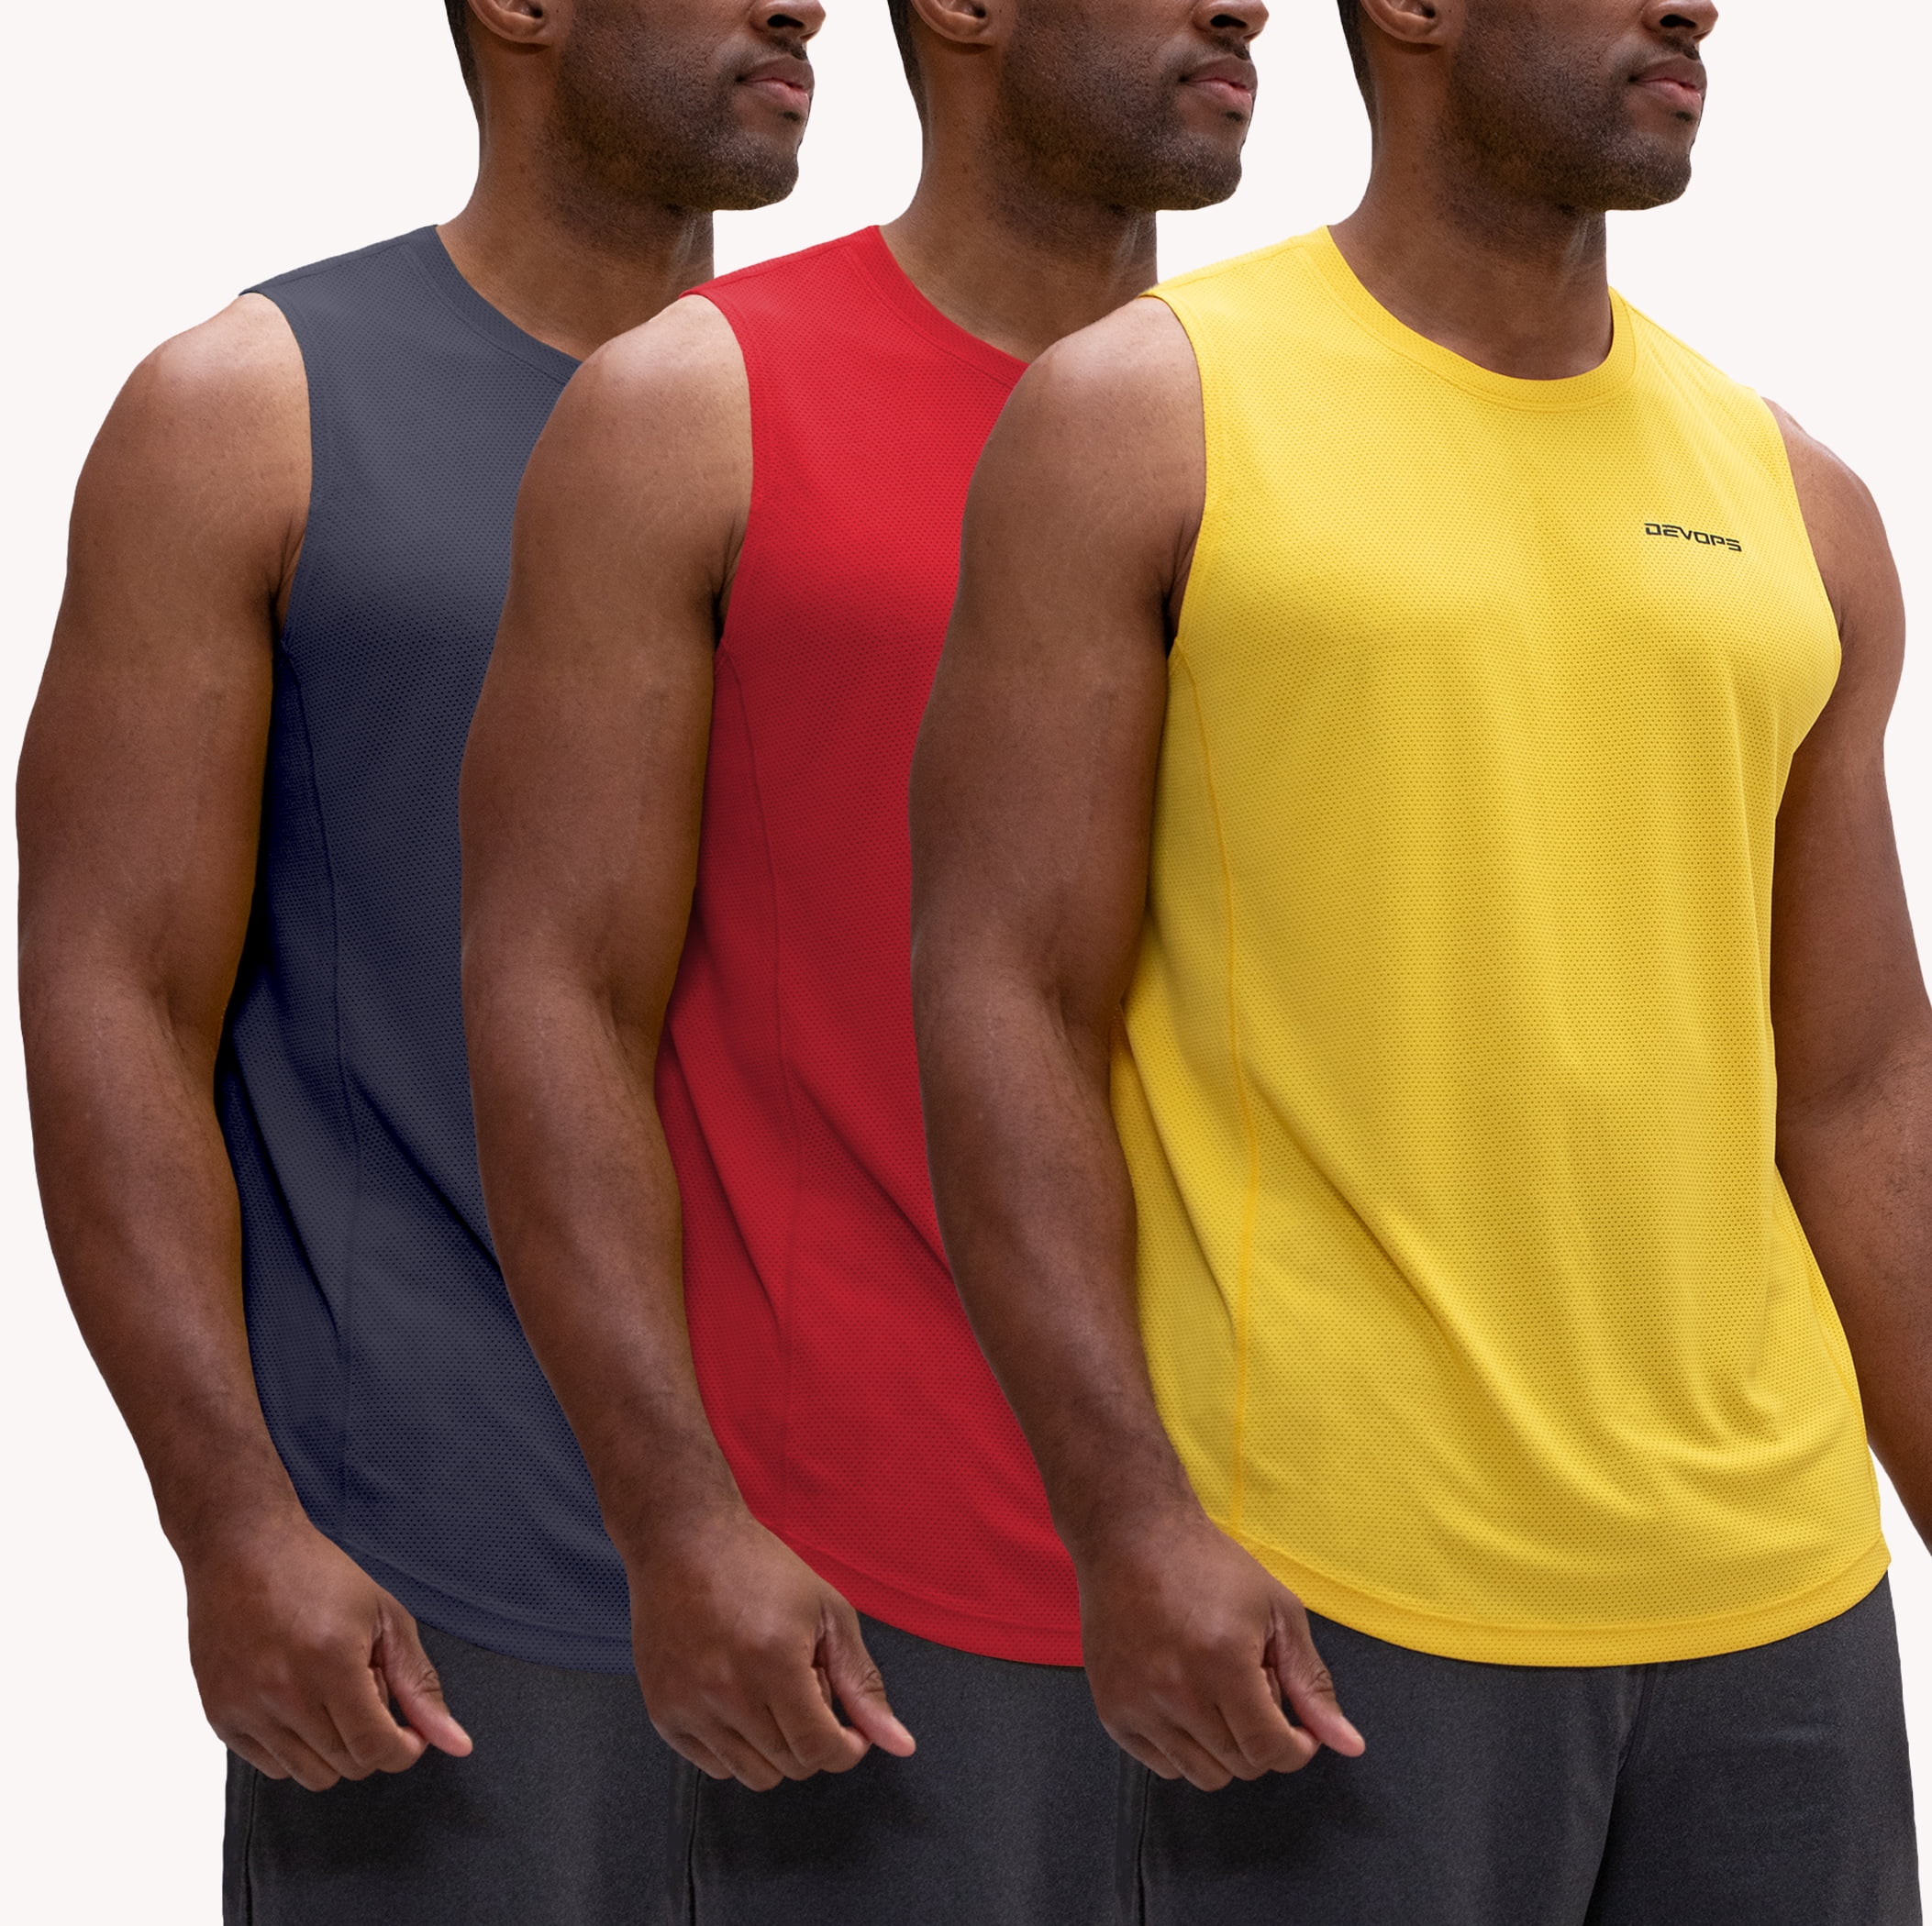 DEVOPS 3 Pack Men's Muscle Shirts Sleeveless dry Fit Gym Workout Tank Top  (3X-Large, Charcoal/Red/Yellow) 